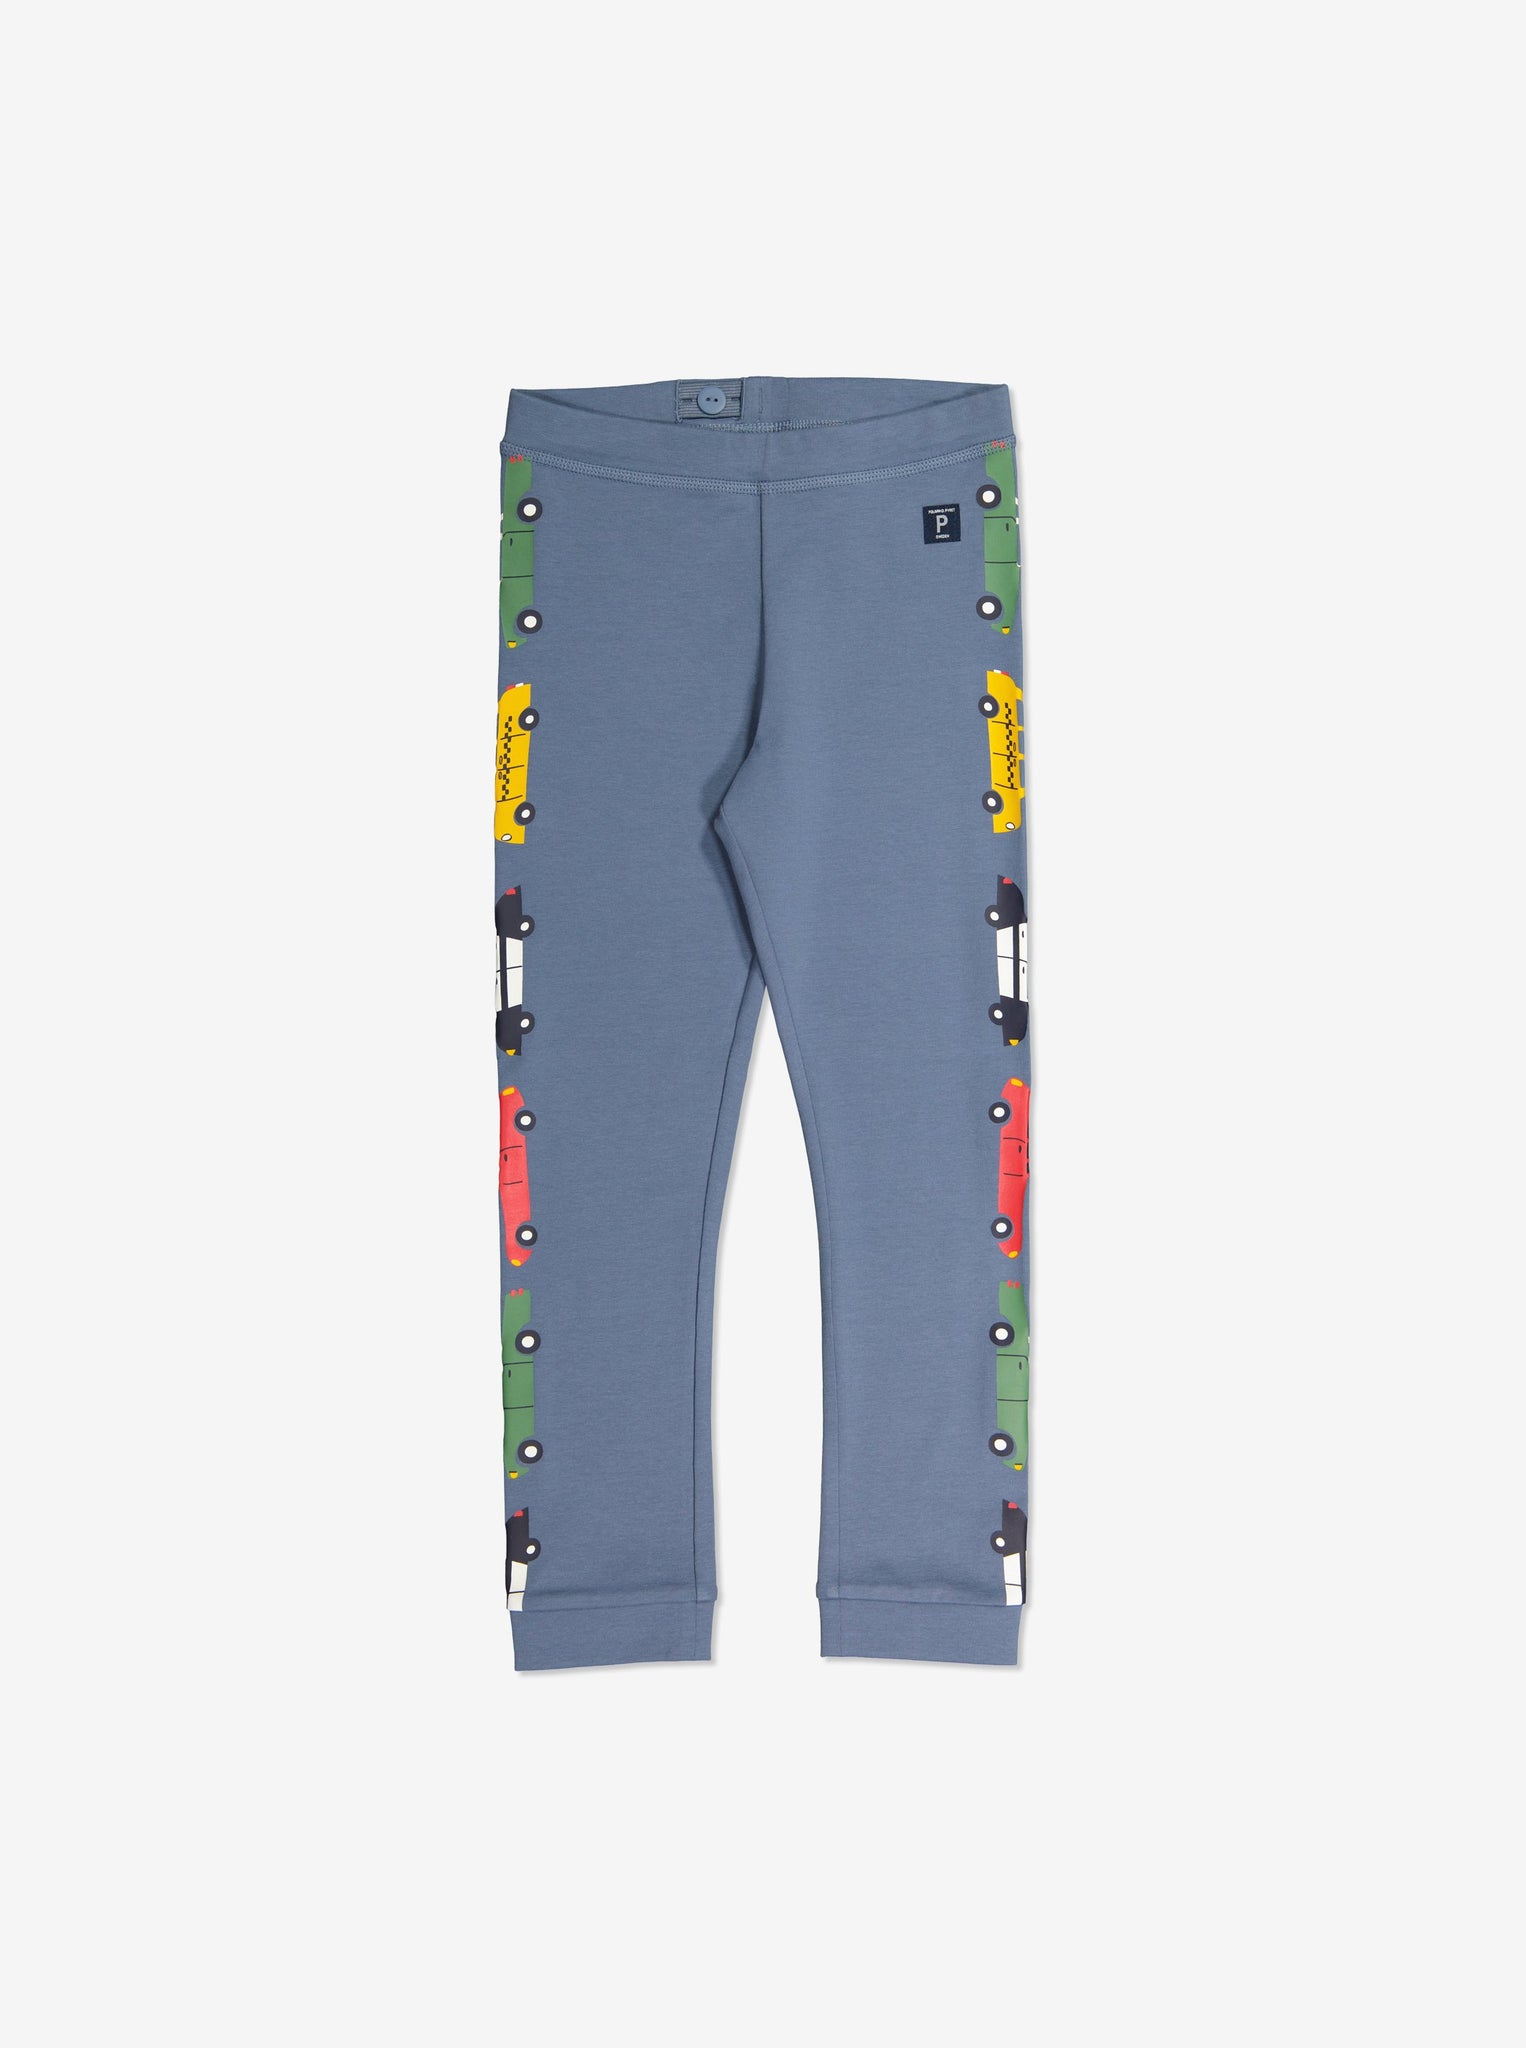  Organic Blue Kids Trousers from Polarn O. Pyret Kidswear. Made from eco-friendly materials.